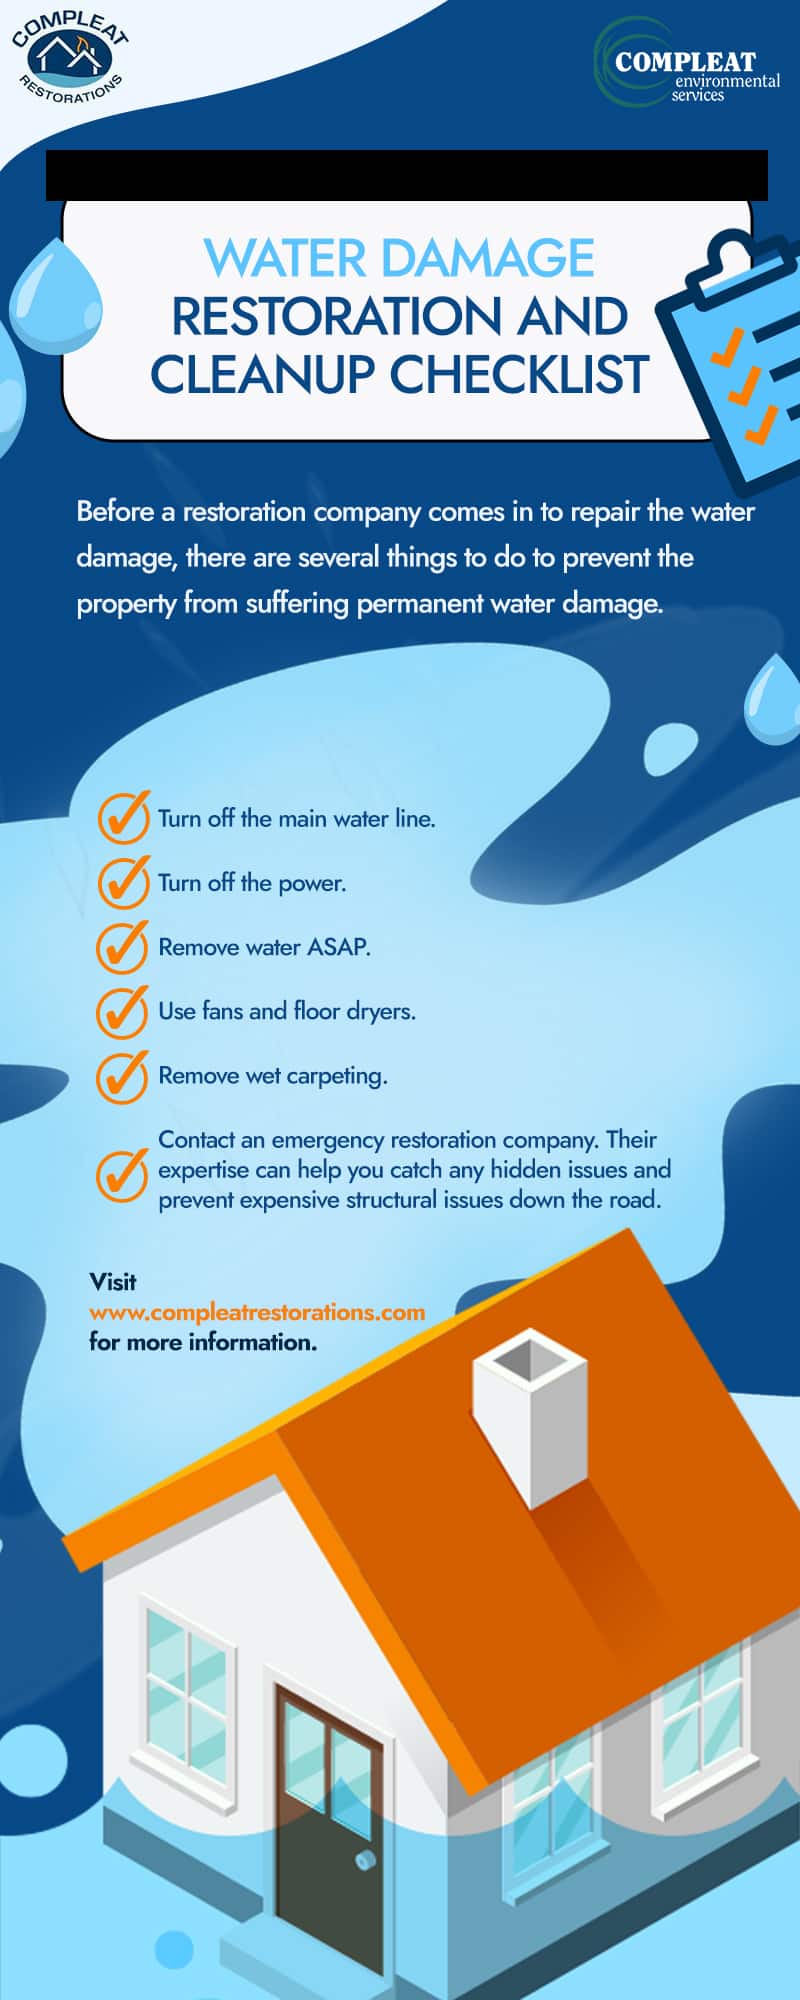 Water Damage Restoration and Cleanup Checklist infographic